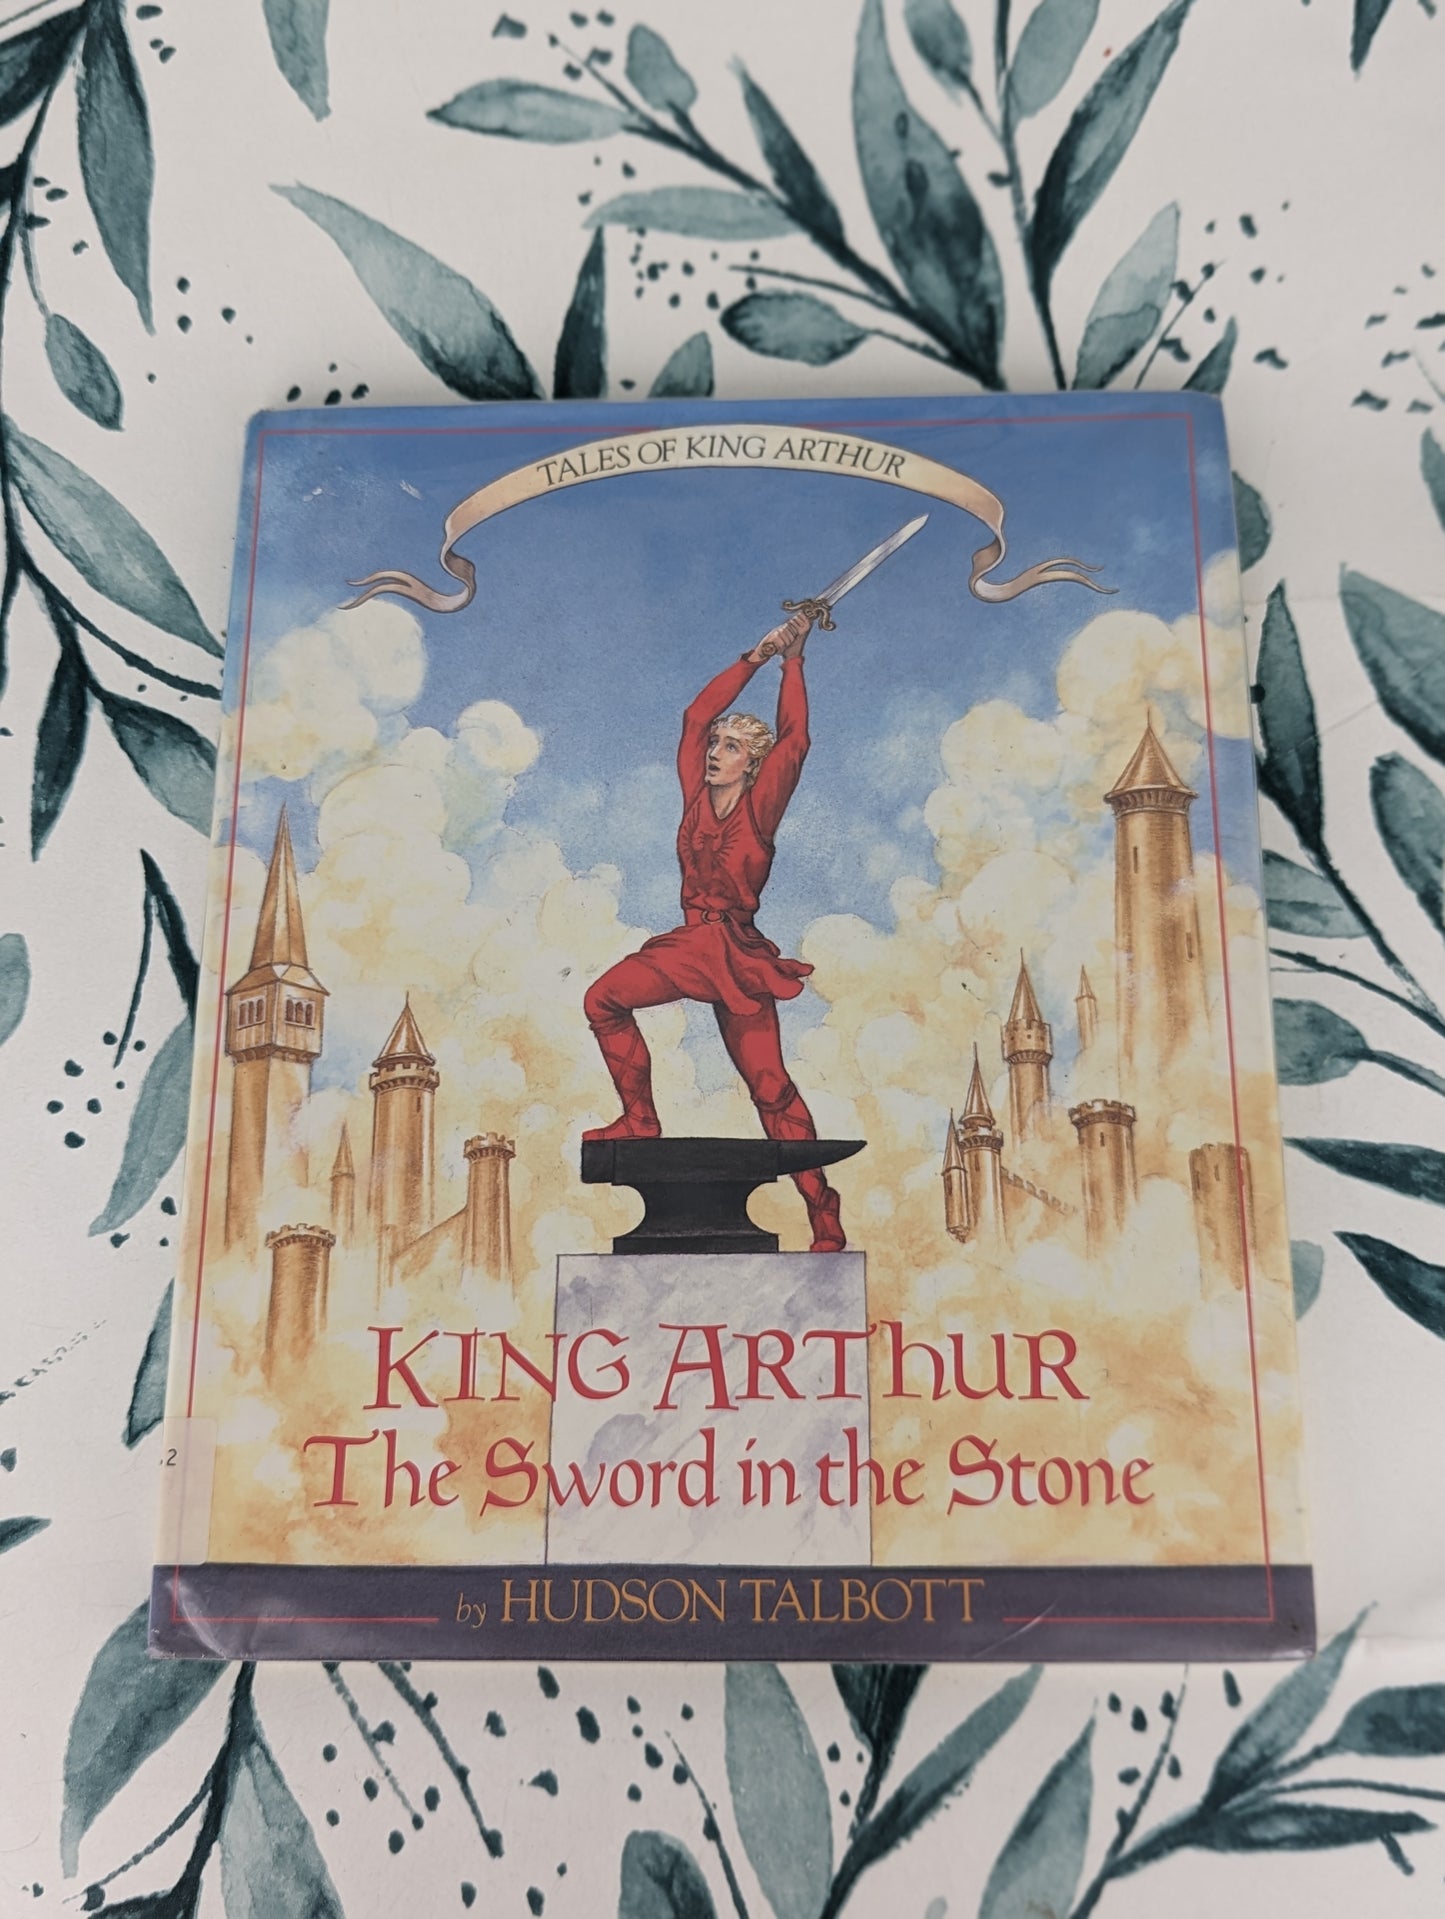 King Arthur The Sword in the Stone